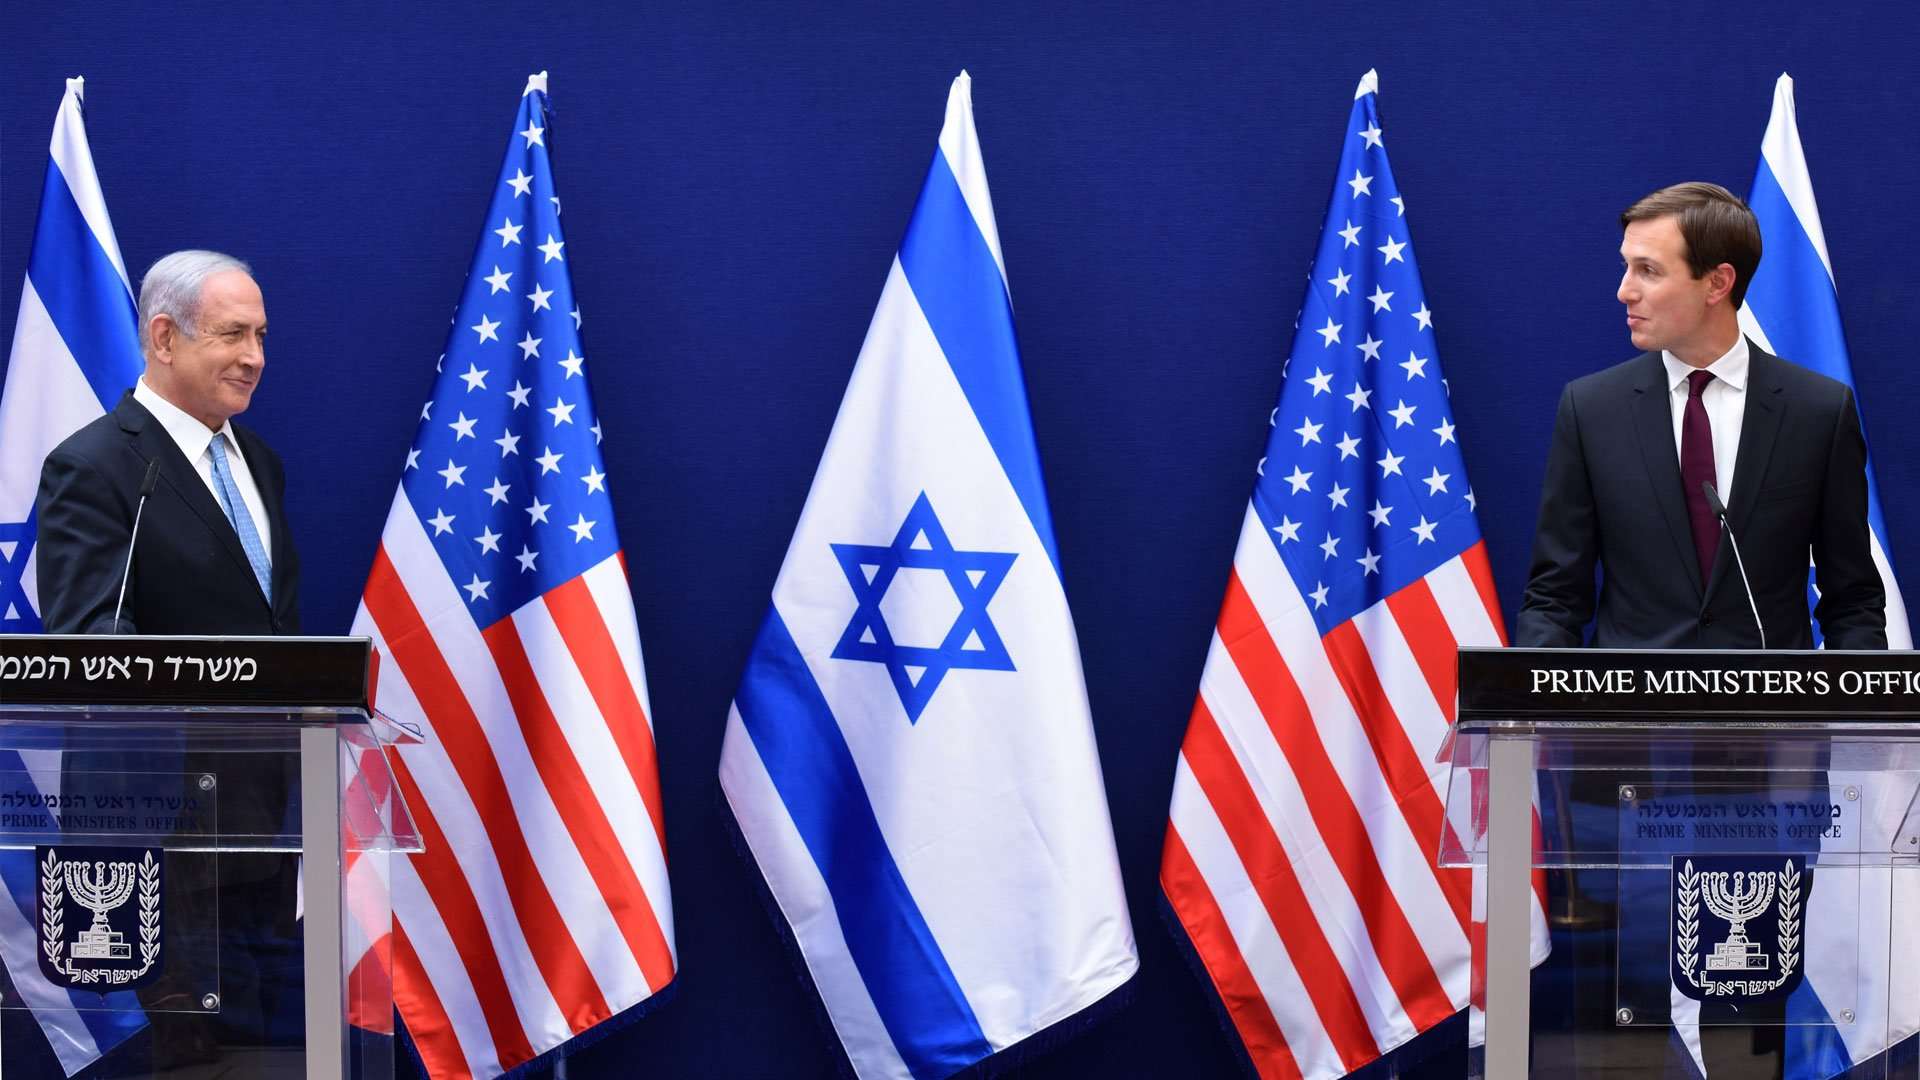 Netanyahu and Kusher at press conference for Abraham Accords